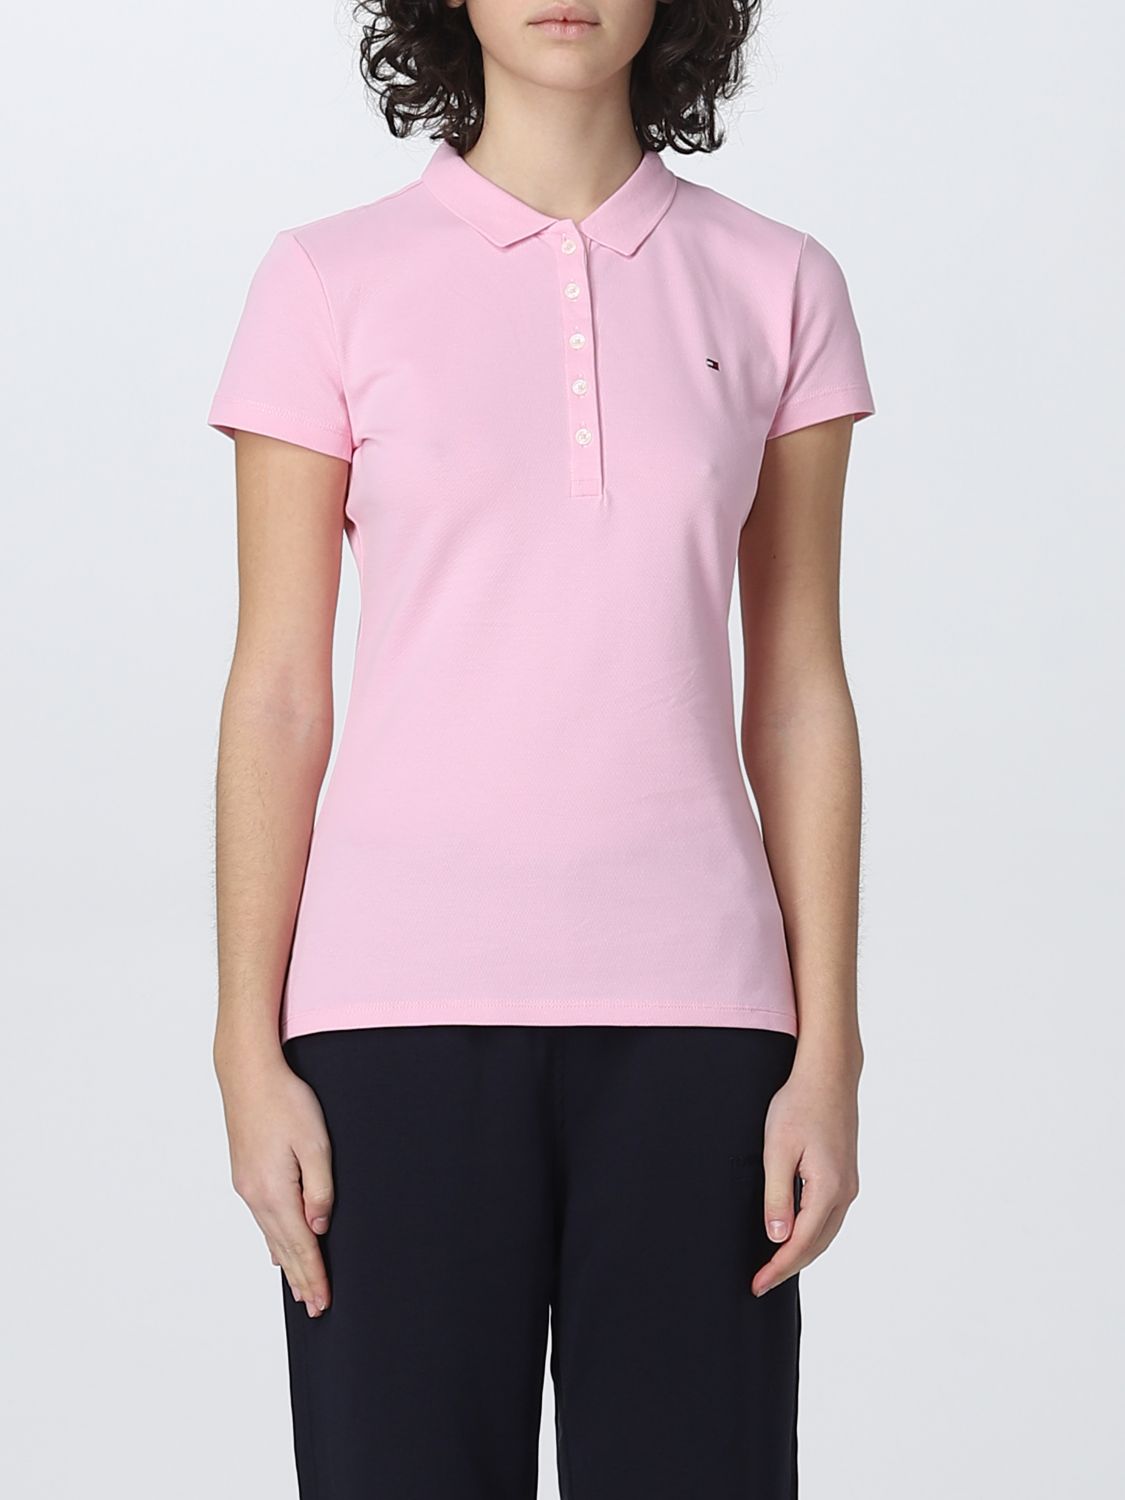 TOMMY polo shirt for woman - | Tommy Hilfiger polo shirt WW0WW27947 online GIGLIO.COM